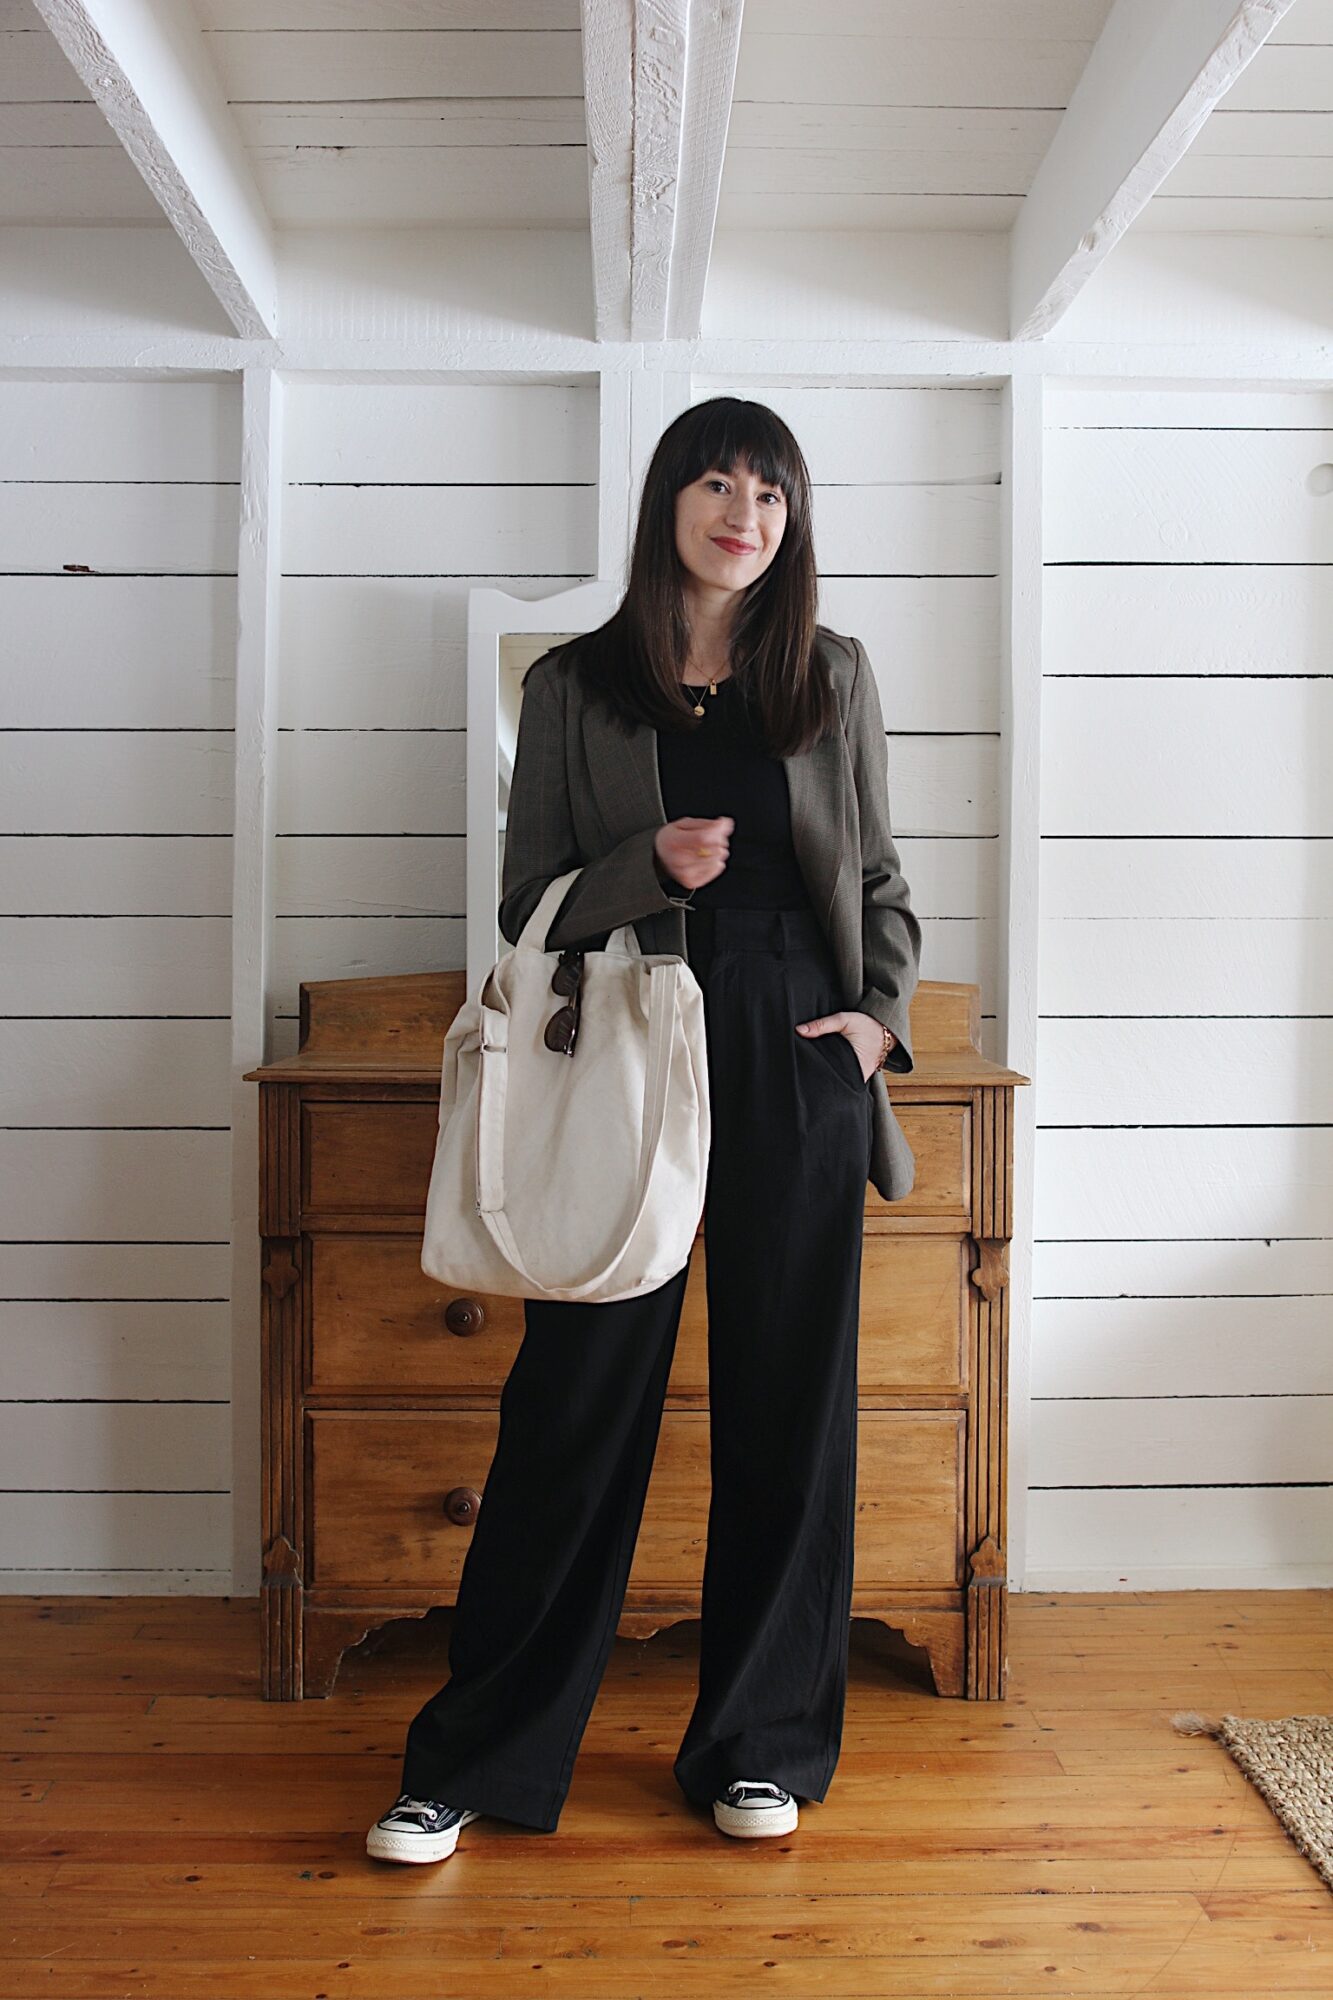 3 Looks: How I'm Styling my Wide Leg Linen Pants for Spring +